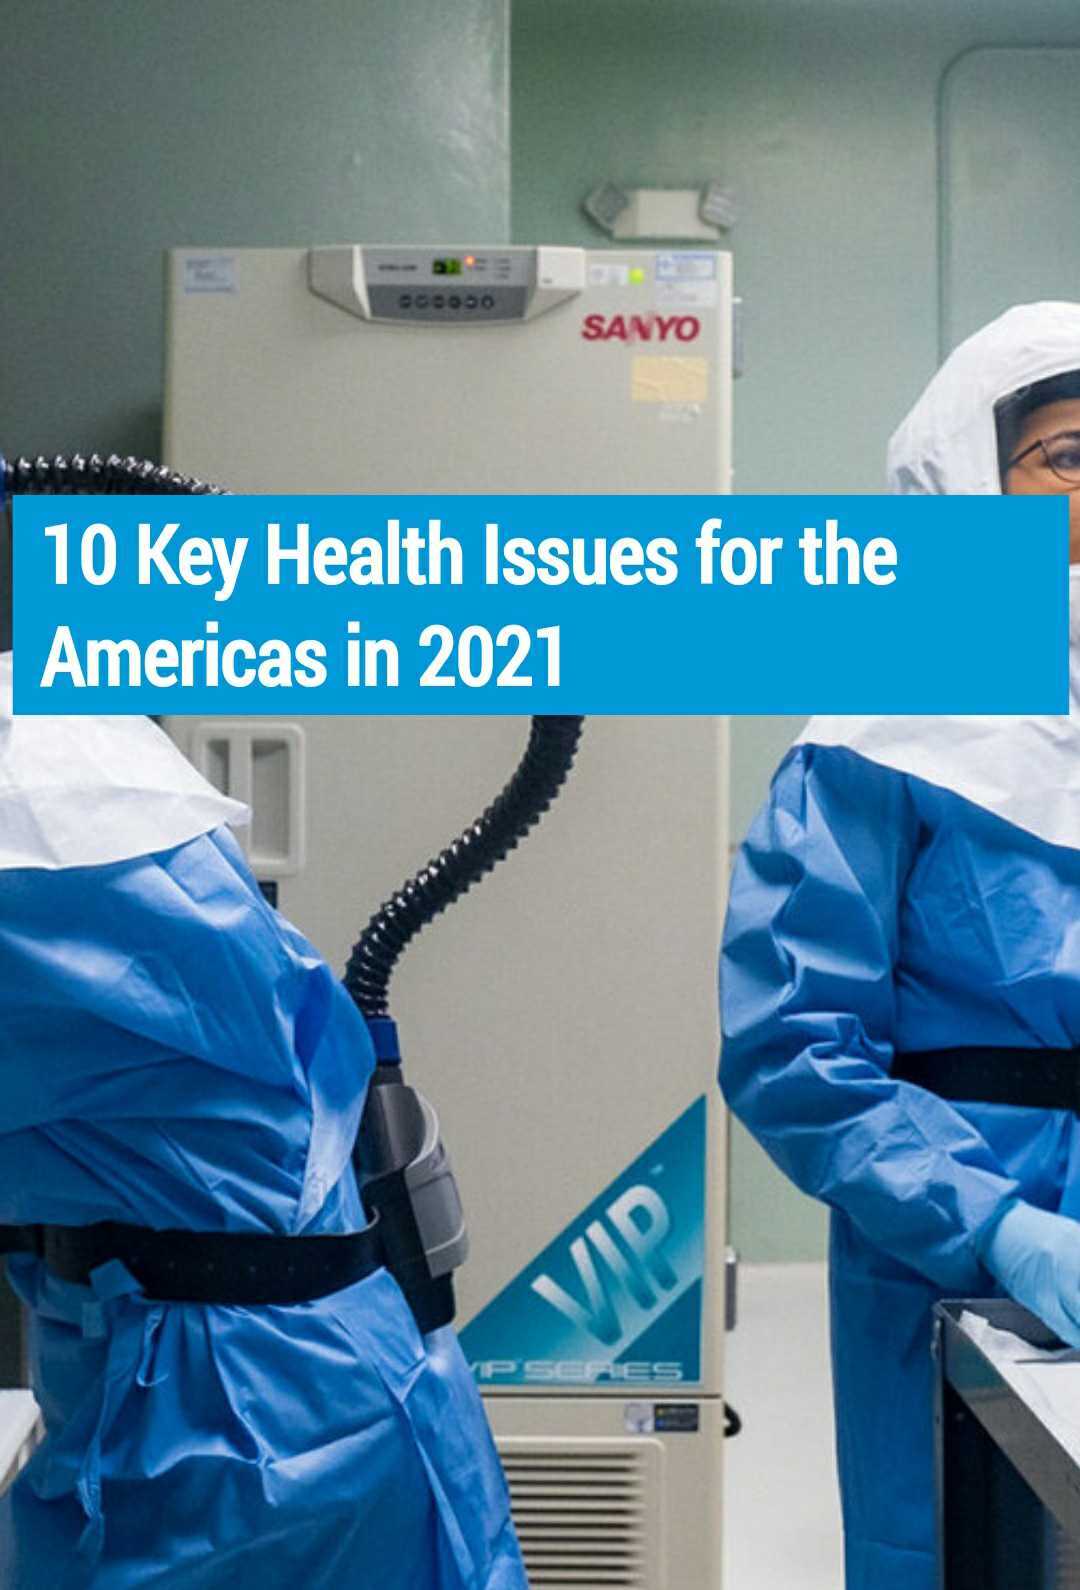 10 Key Health Issues to Track in the Americas in 2021